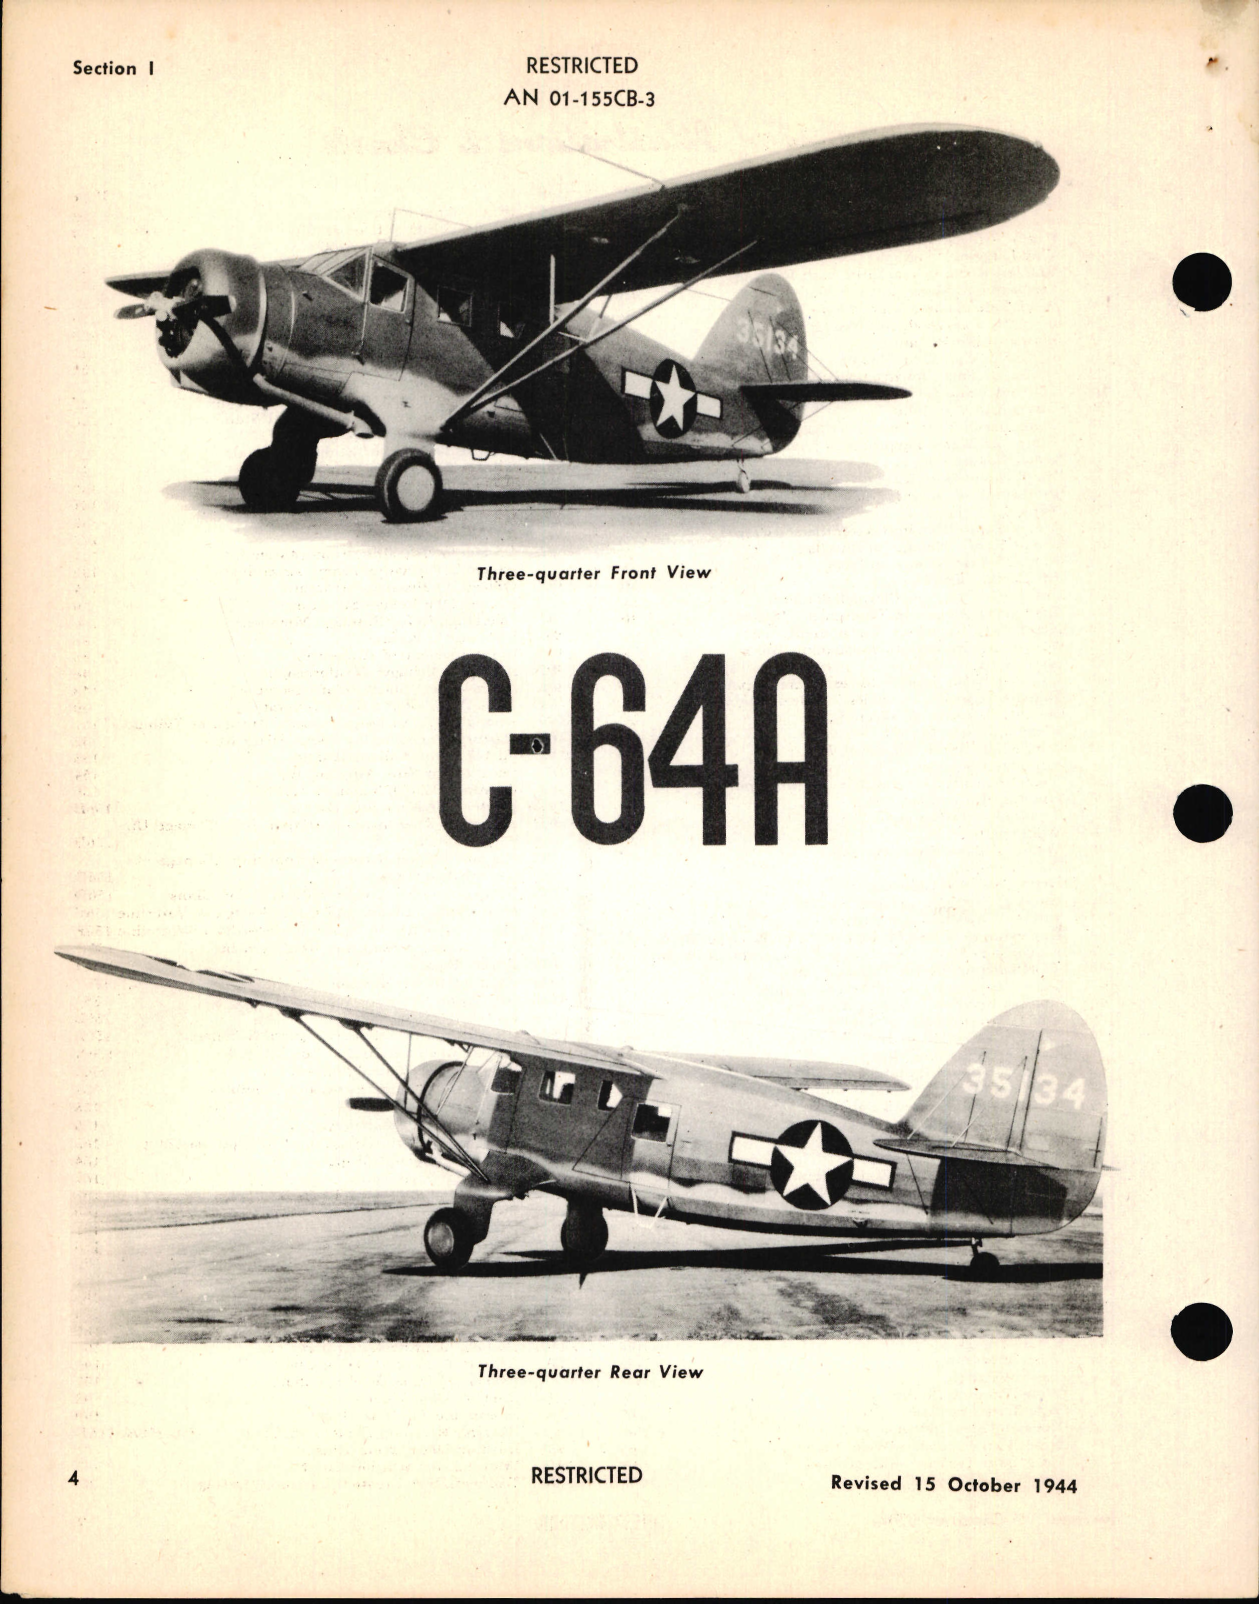 Sample page 6 from AirCorps Library document: Structural Repair Instructions for C-64A